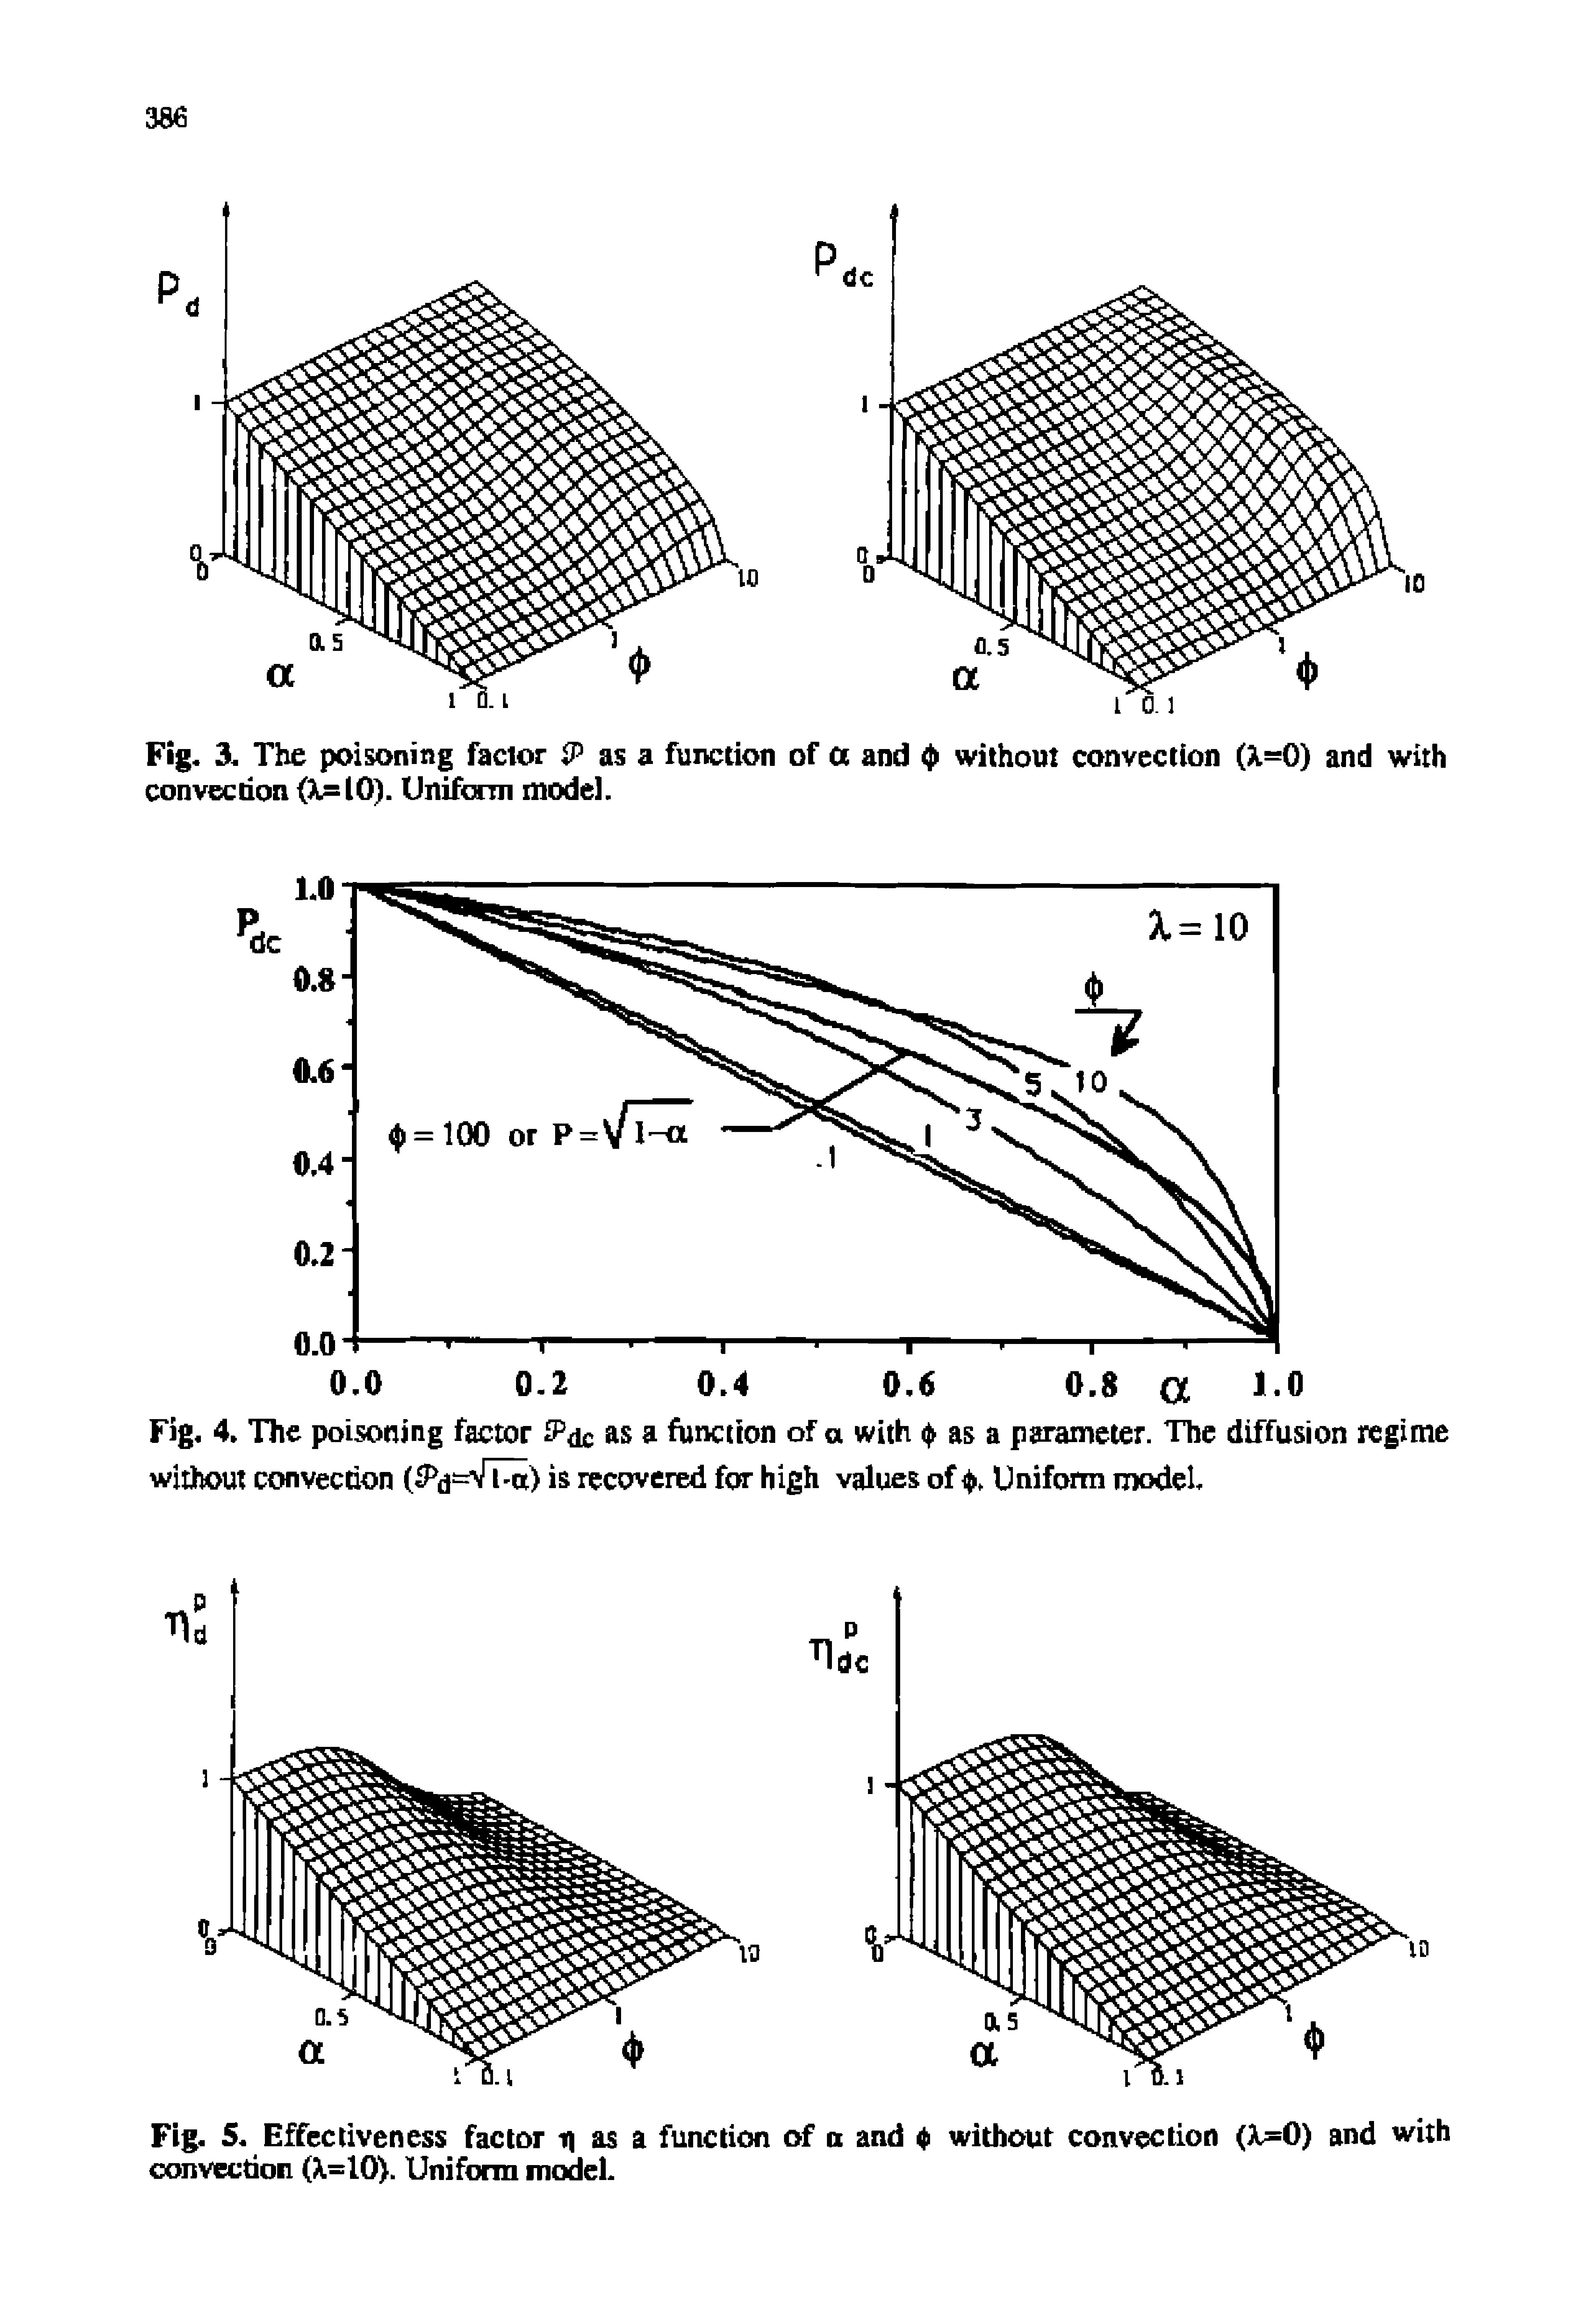 Fig. 4. The poisoning factor iPdc its a function of a with 4 as a parameter. The diffusion regime without convection >s recovered for high values of 4. Uniform model.